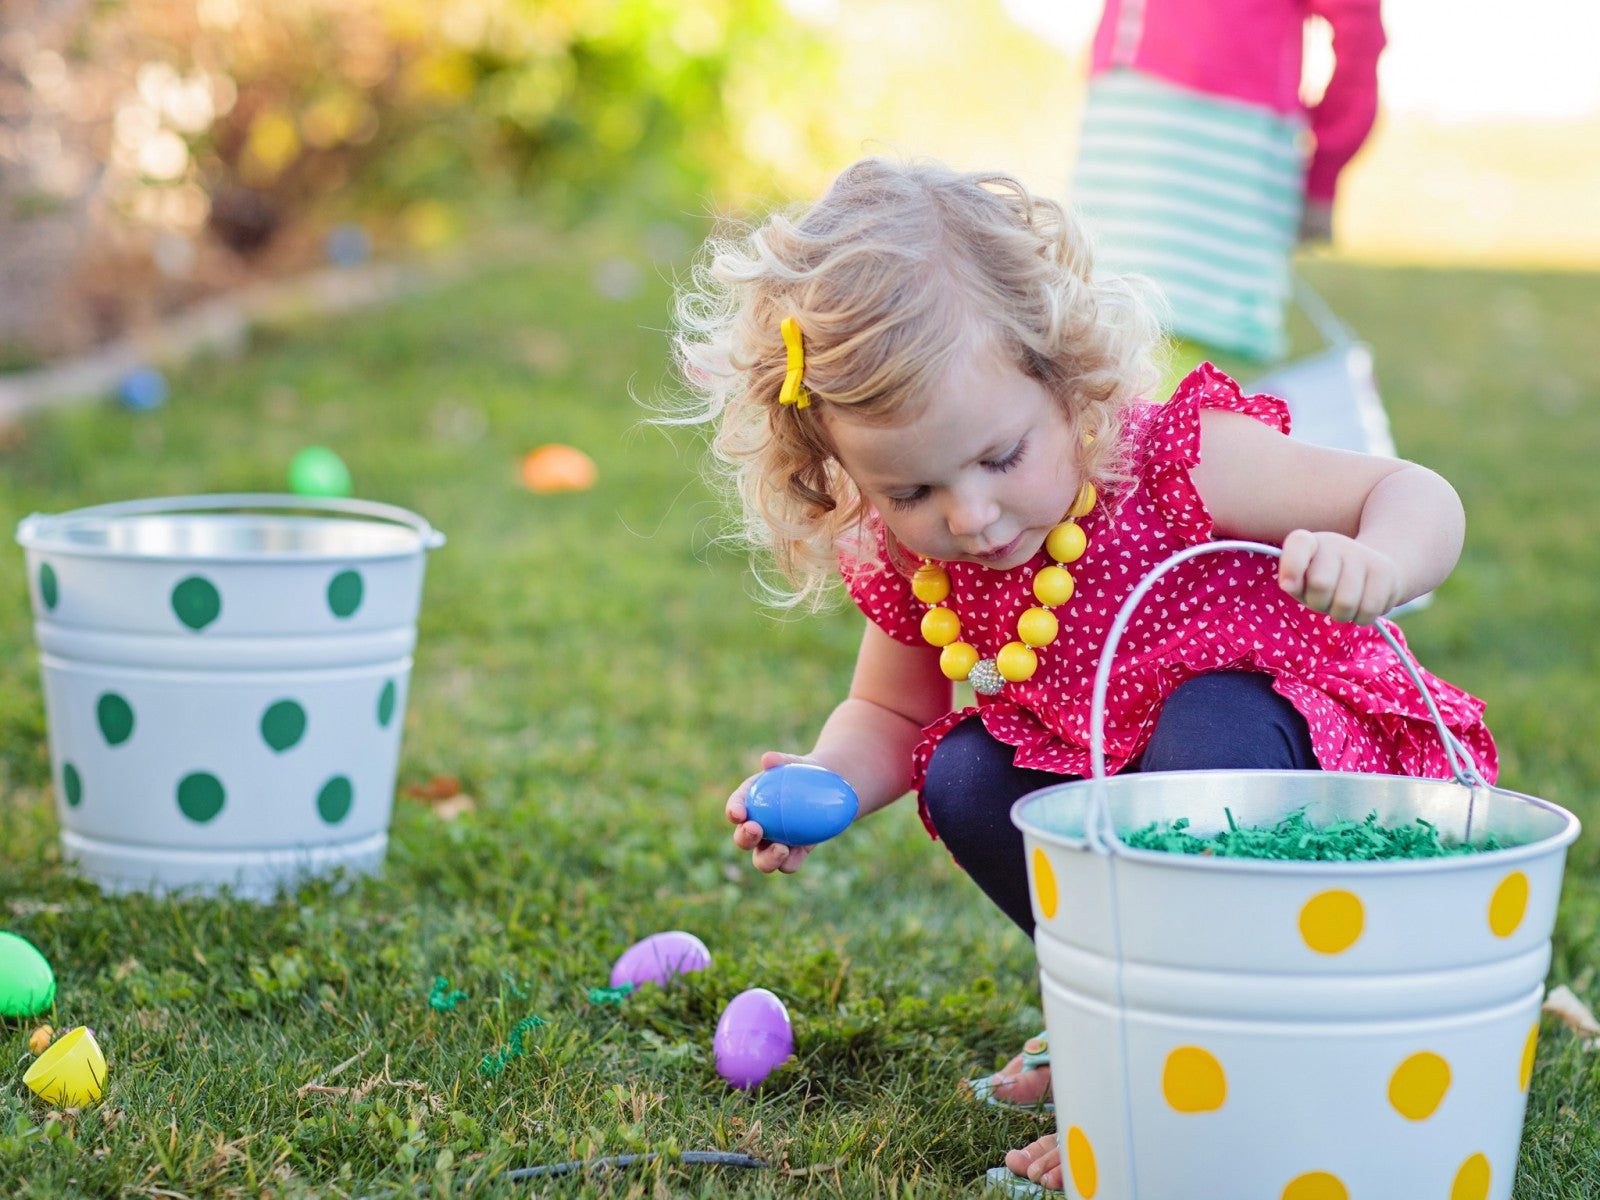 Time to Get Egg-cited - Easter is Here!